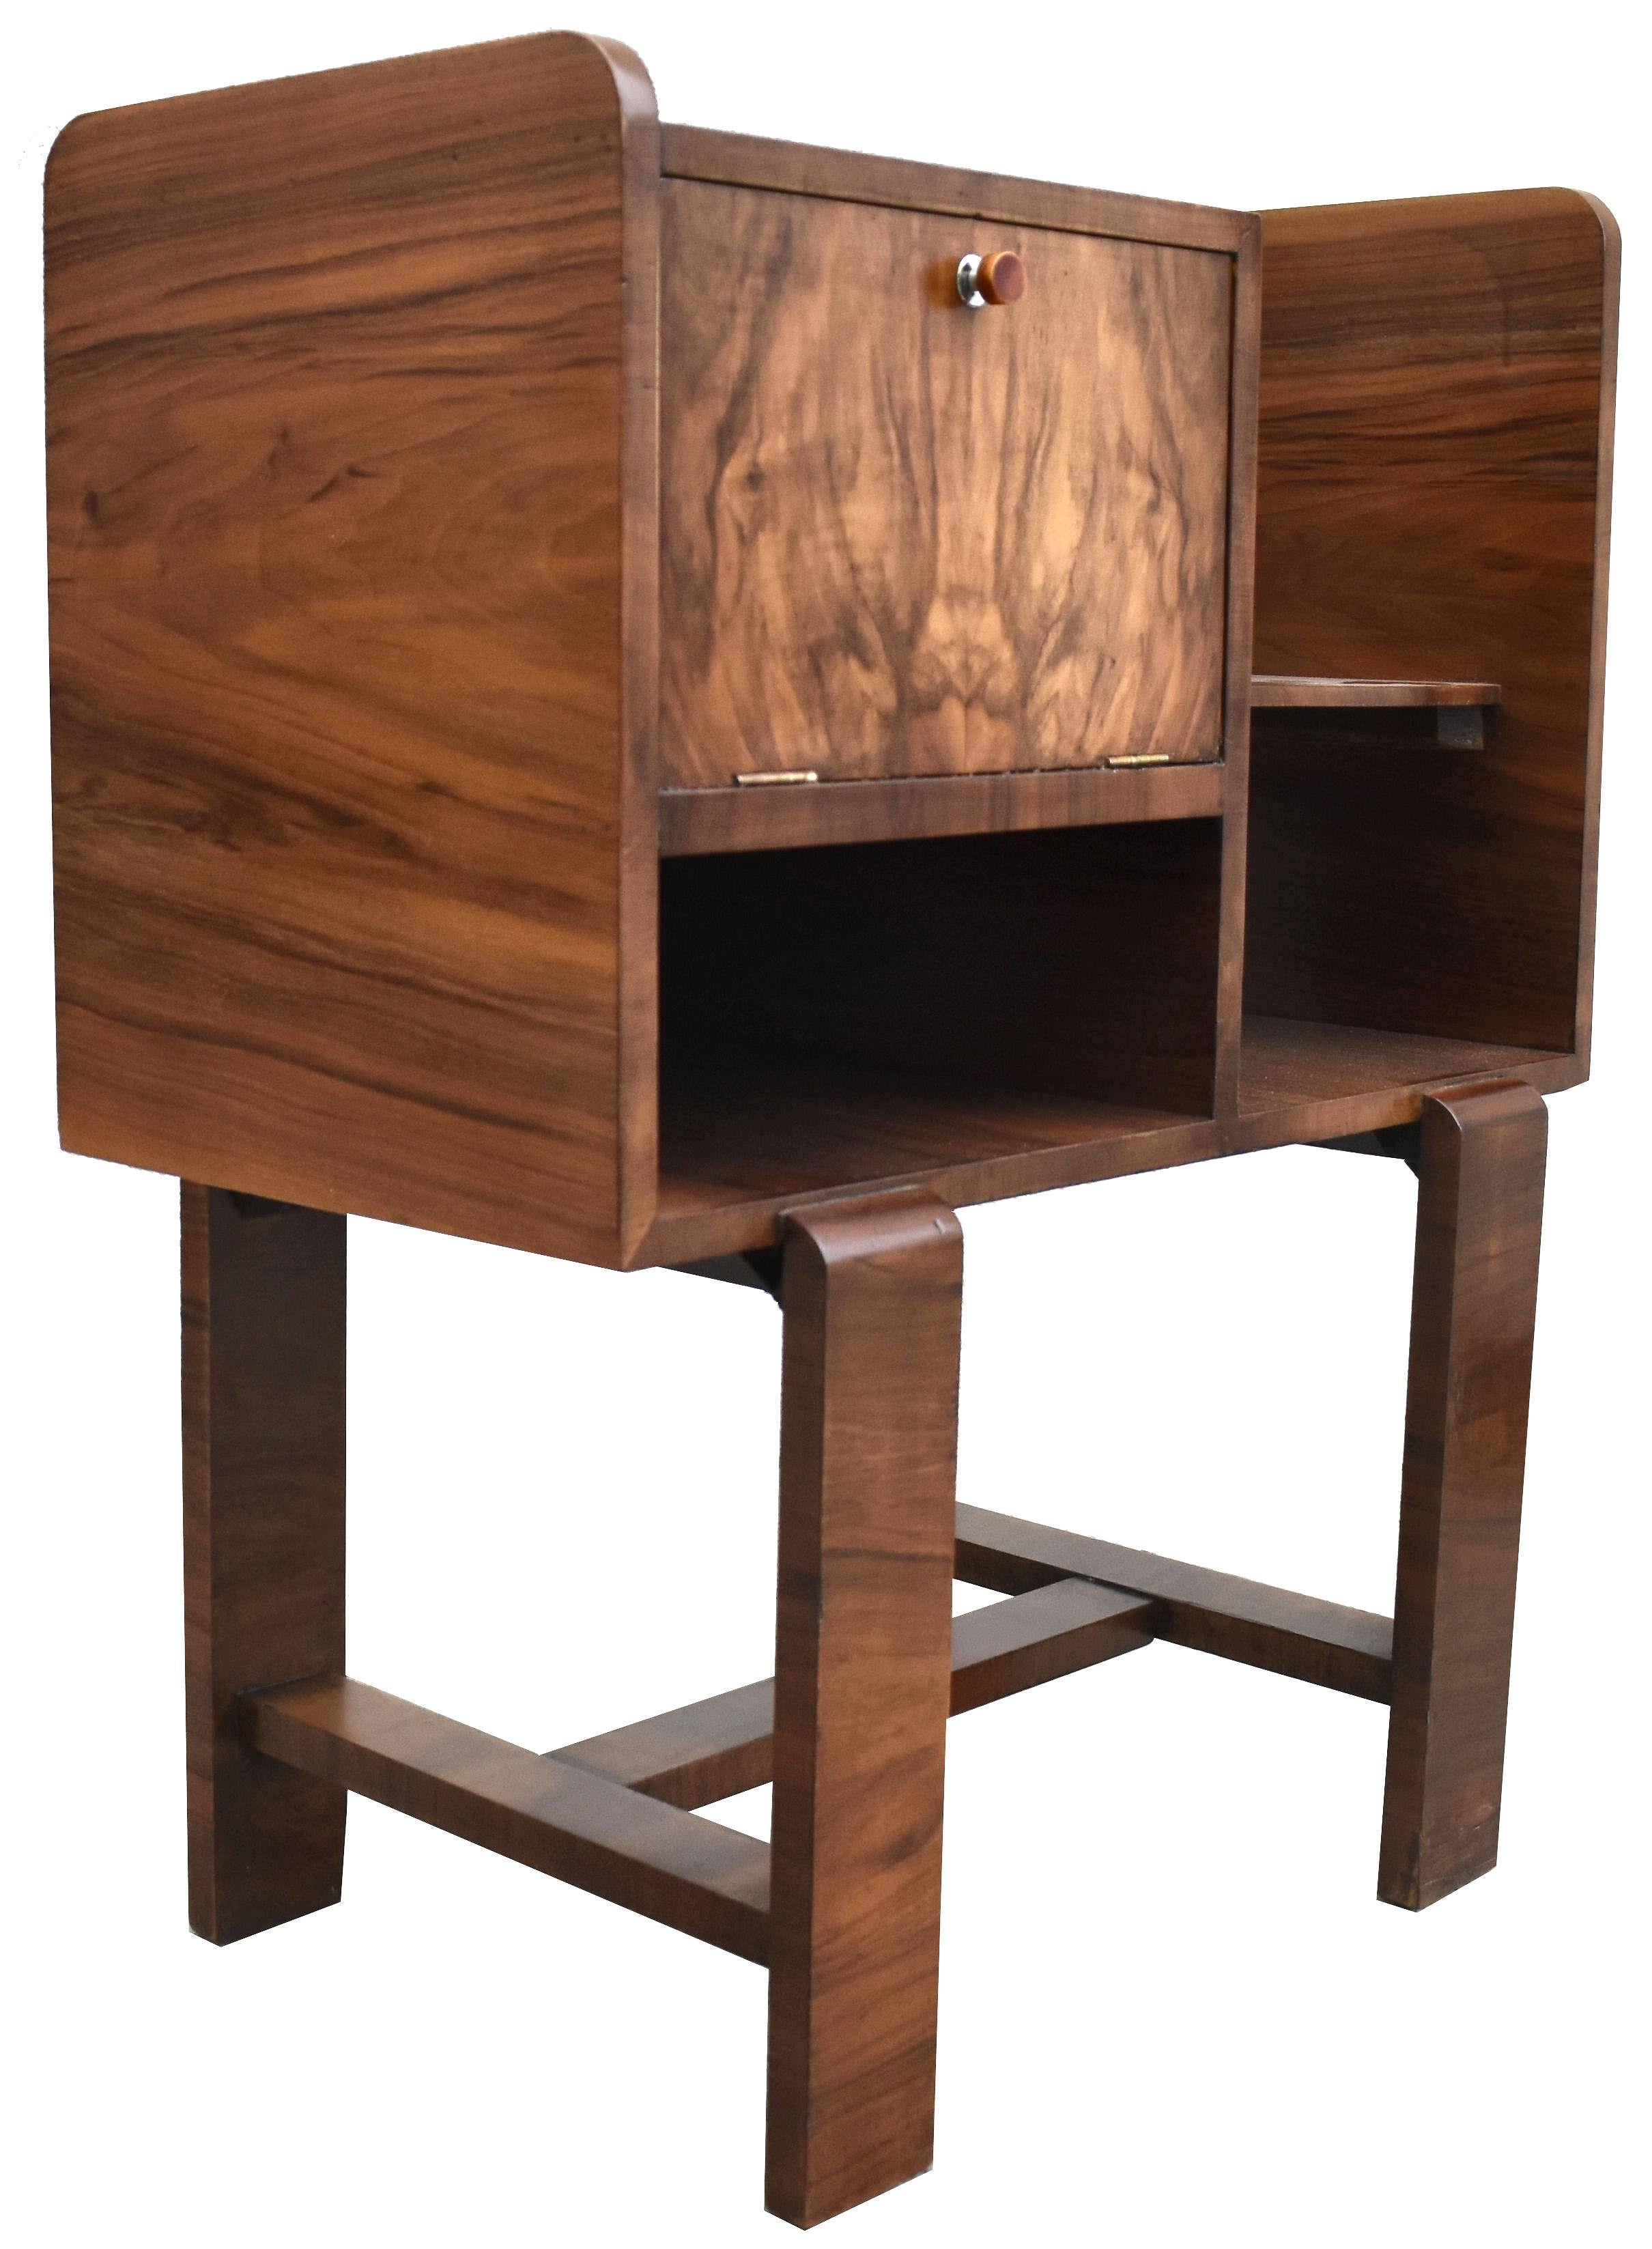 For your consideration is this very attractive 1930's beautifully figured Walnut telephone table. Definitely has a bit of a Bauhaus vibe but we believe this piece to be English in origin. Single cupboard with original catalin bakelite handle to